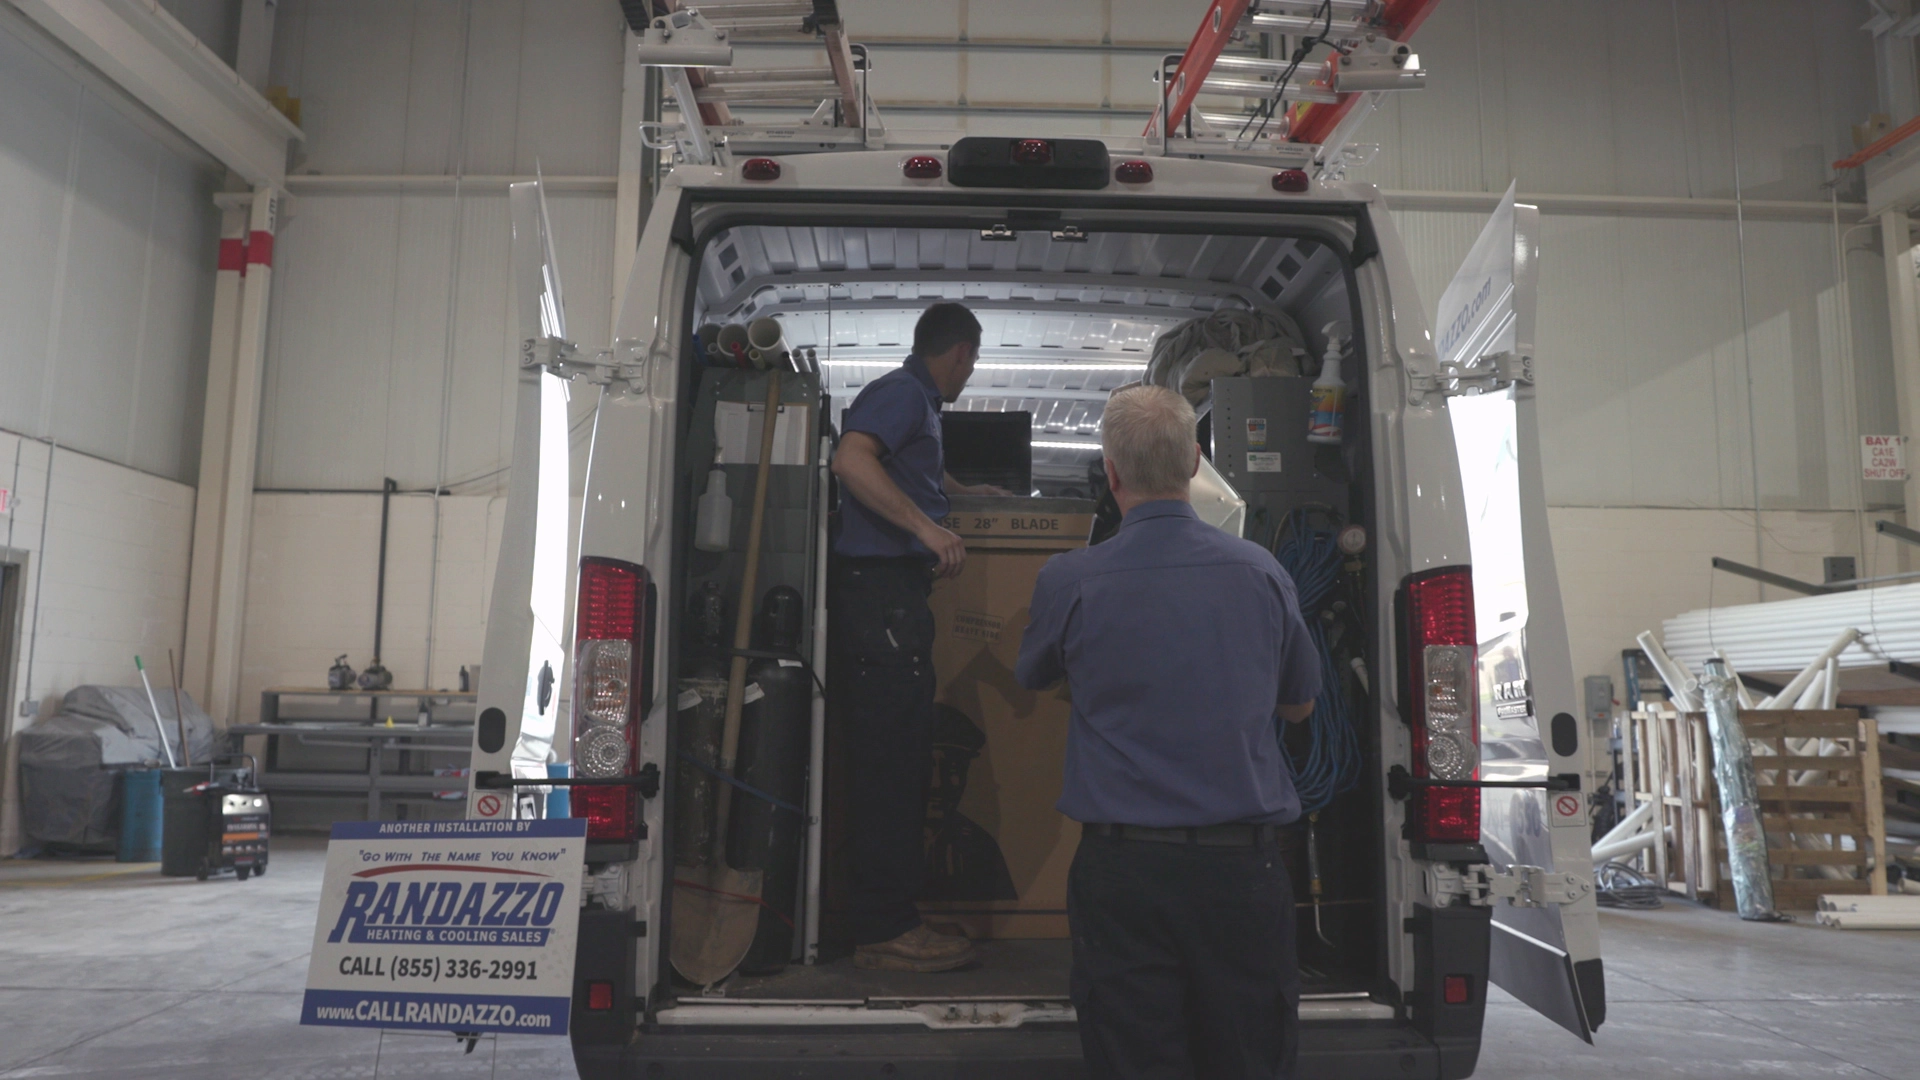 2 Randazzo employees loading the back of a company van with air conditioning replacement units